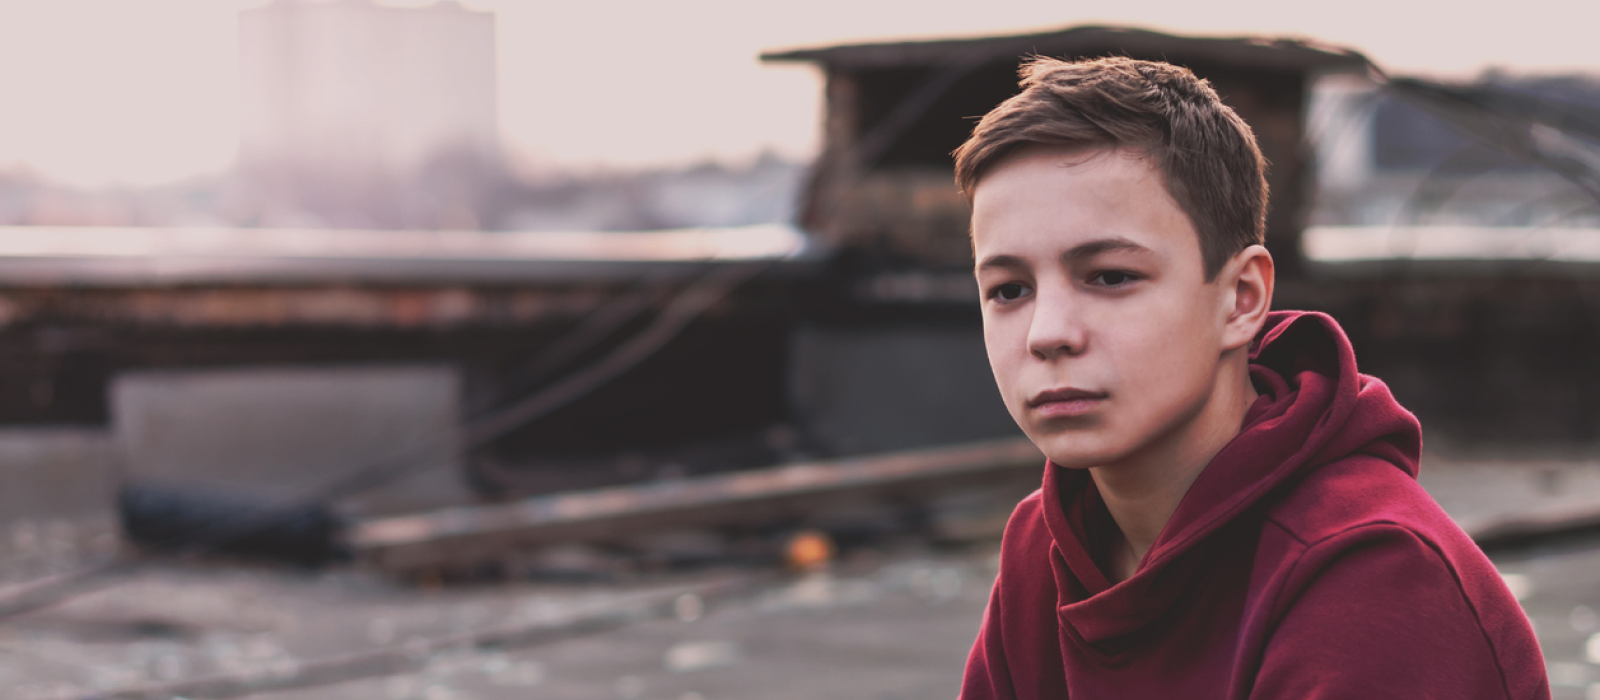 A young boy is seeking therapy for rejection trauma.